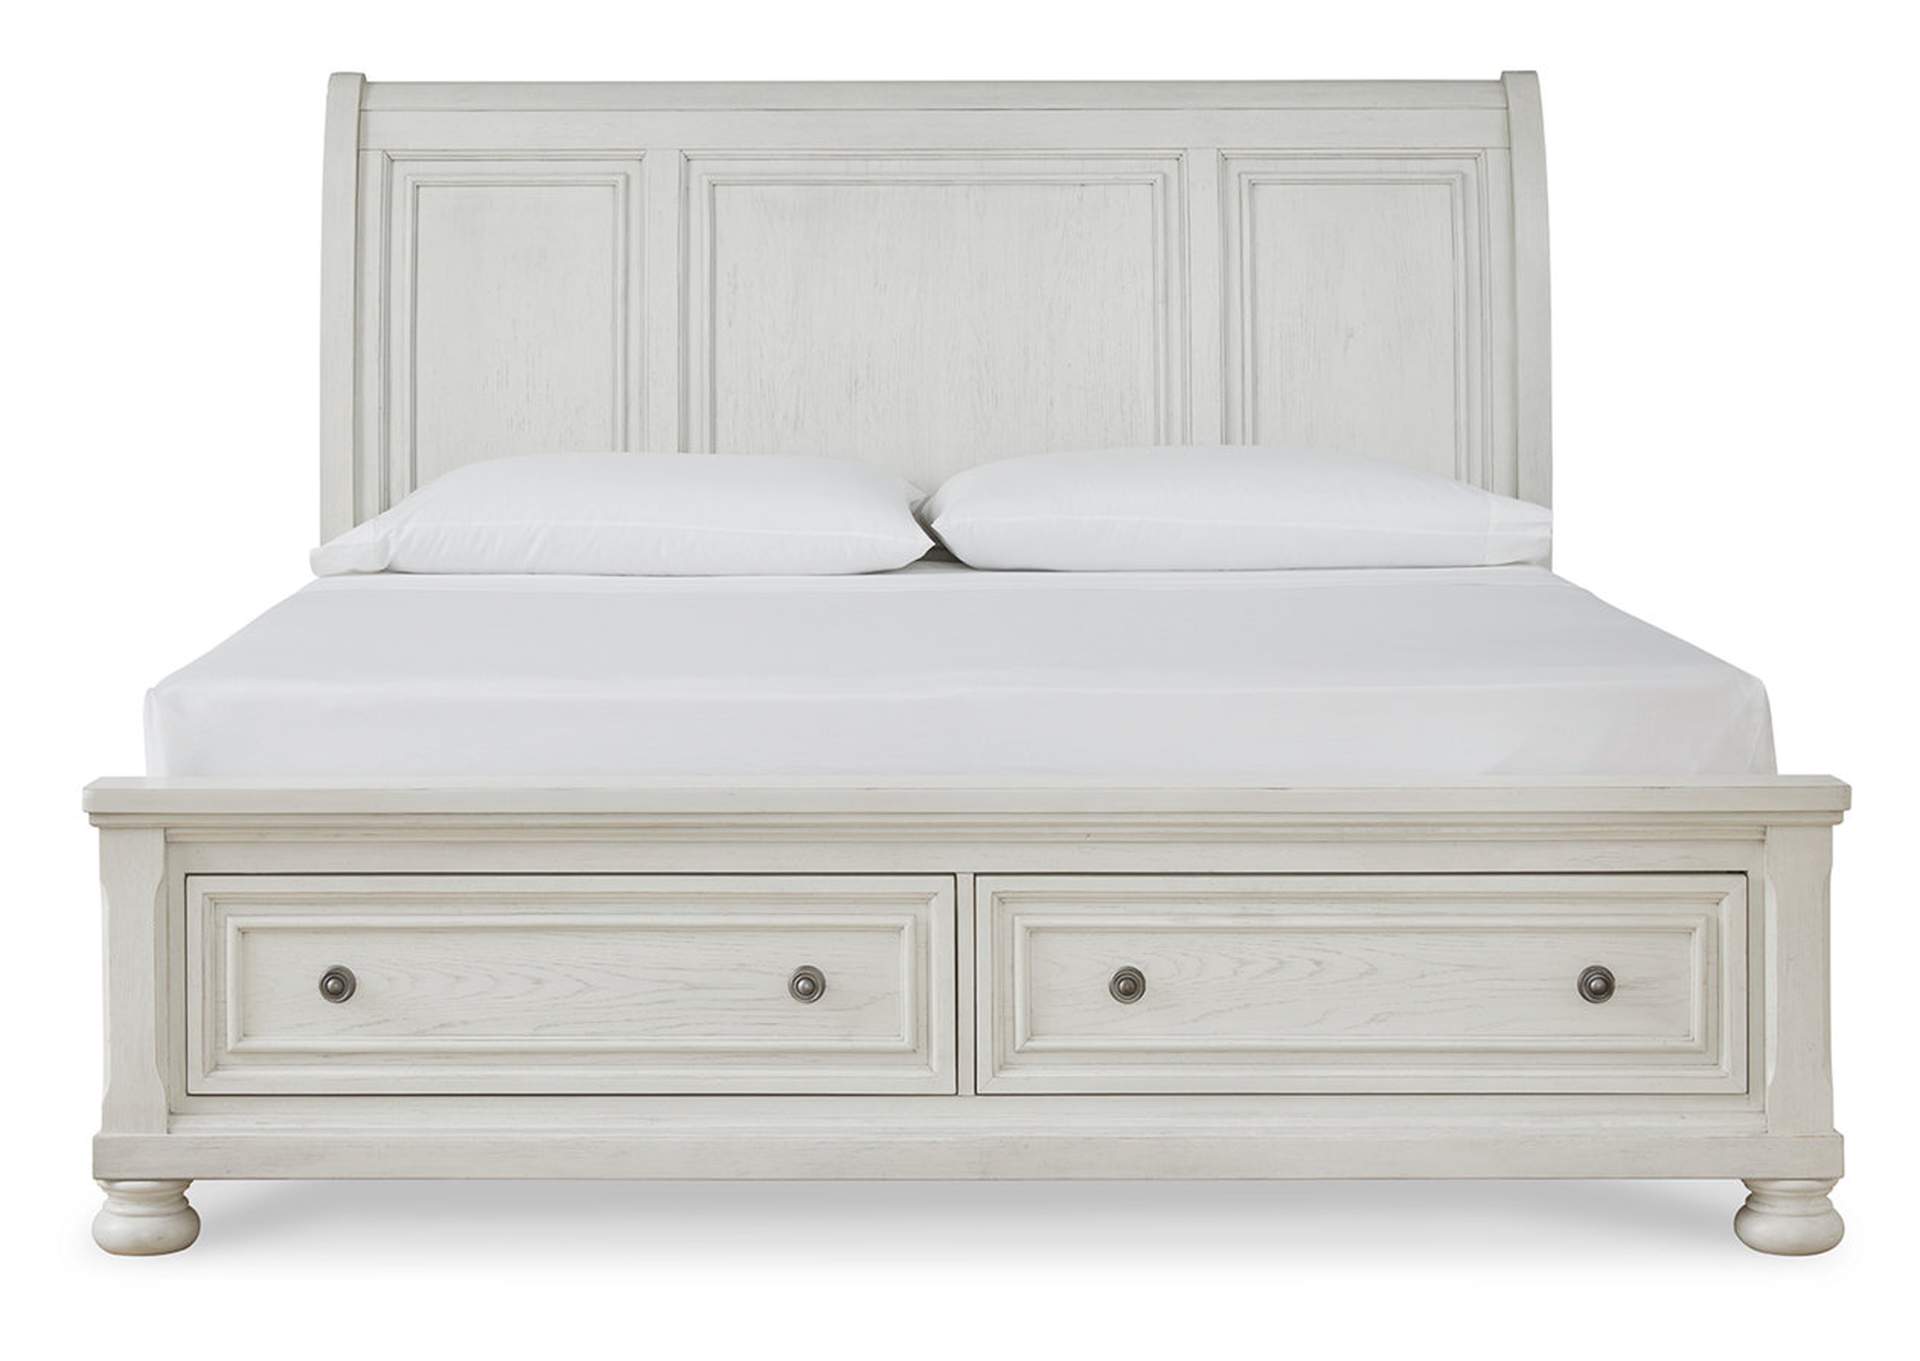 Robbinsdale California King Sleigh Bed with Storage,Signature Design By Ashley